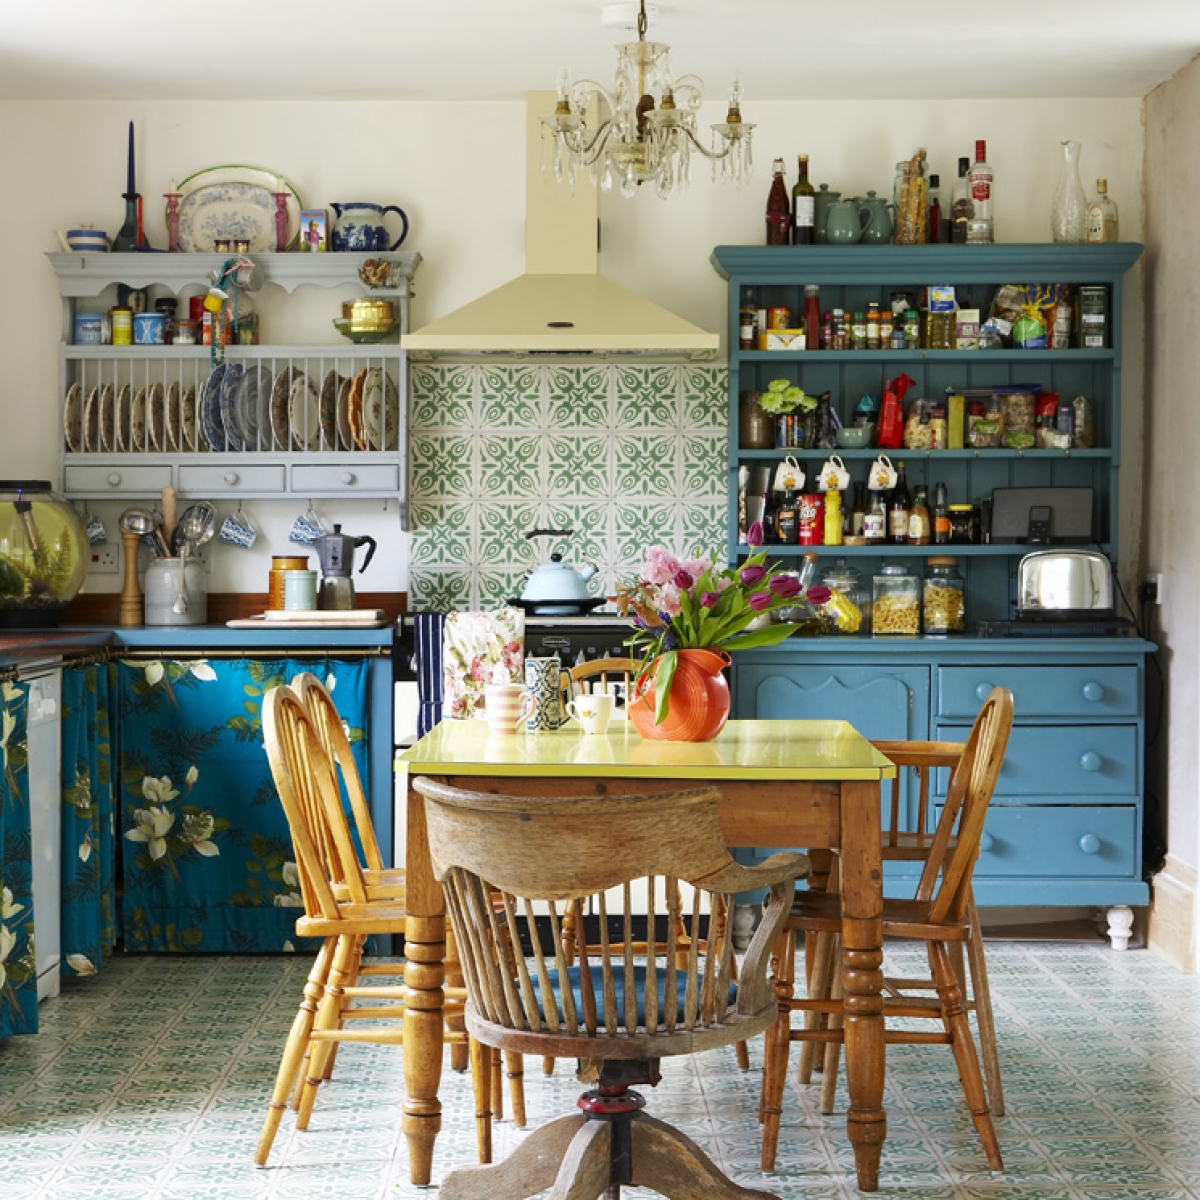 Budget kitchen ideas and vintage style on a shoe string – Sophie Robinson